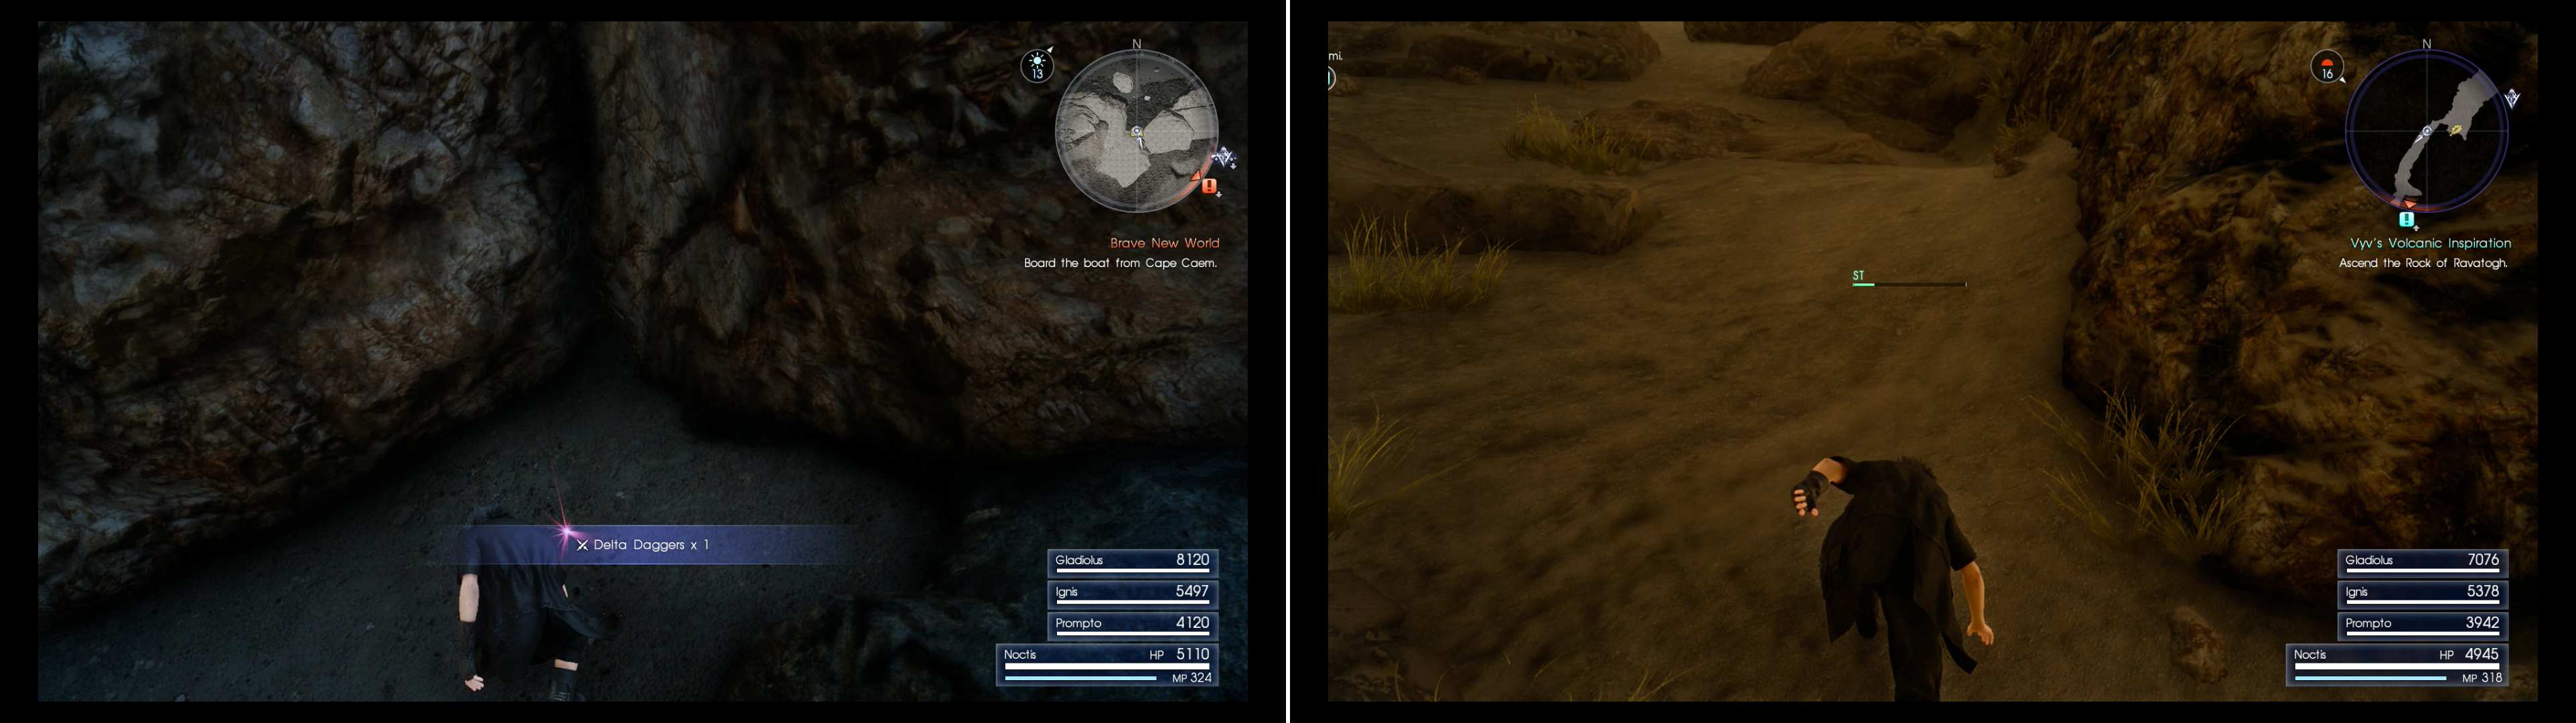 Before you enter the dungeon, search a Treasure Spot to find some Delta Daggers (right). You’ll have to expend stamina to ascend a steep incline (right).